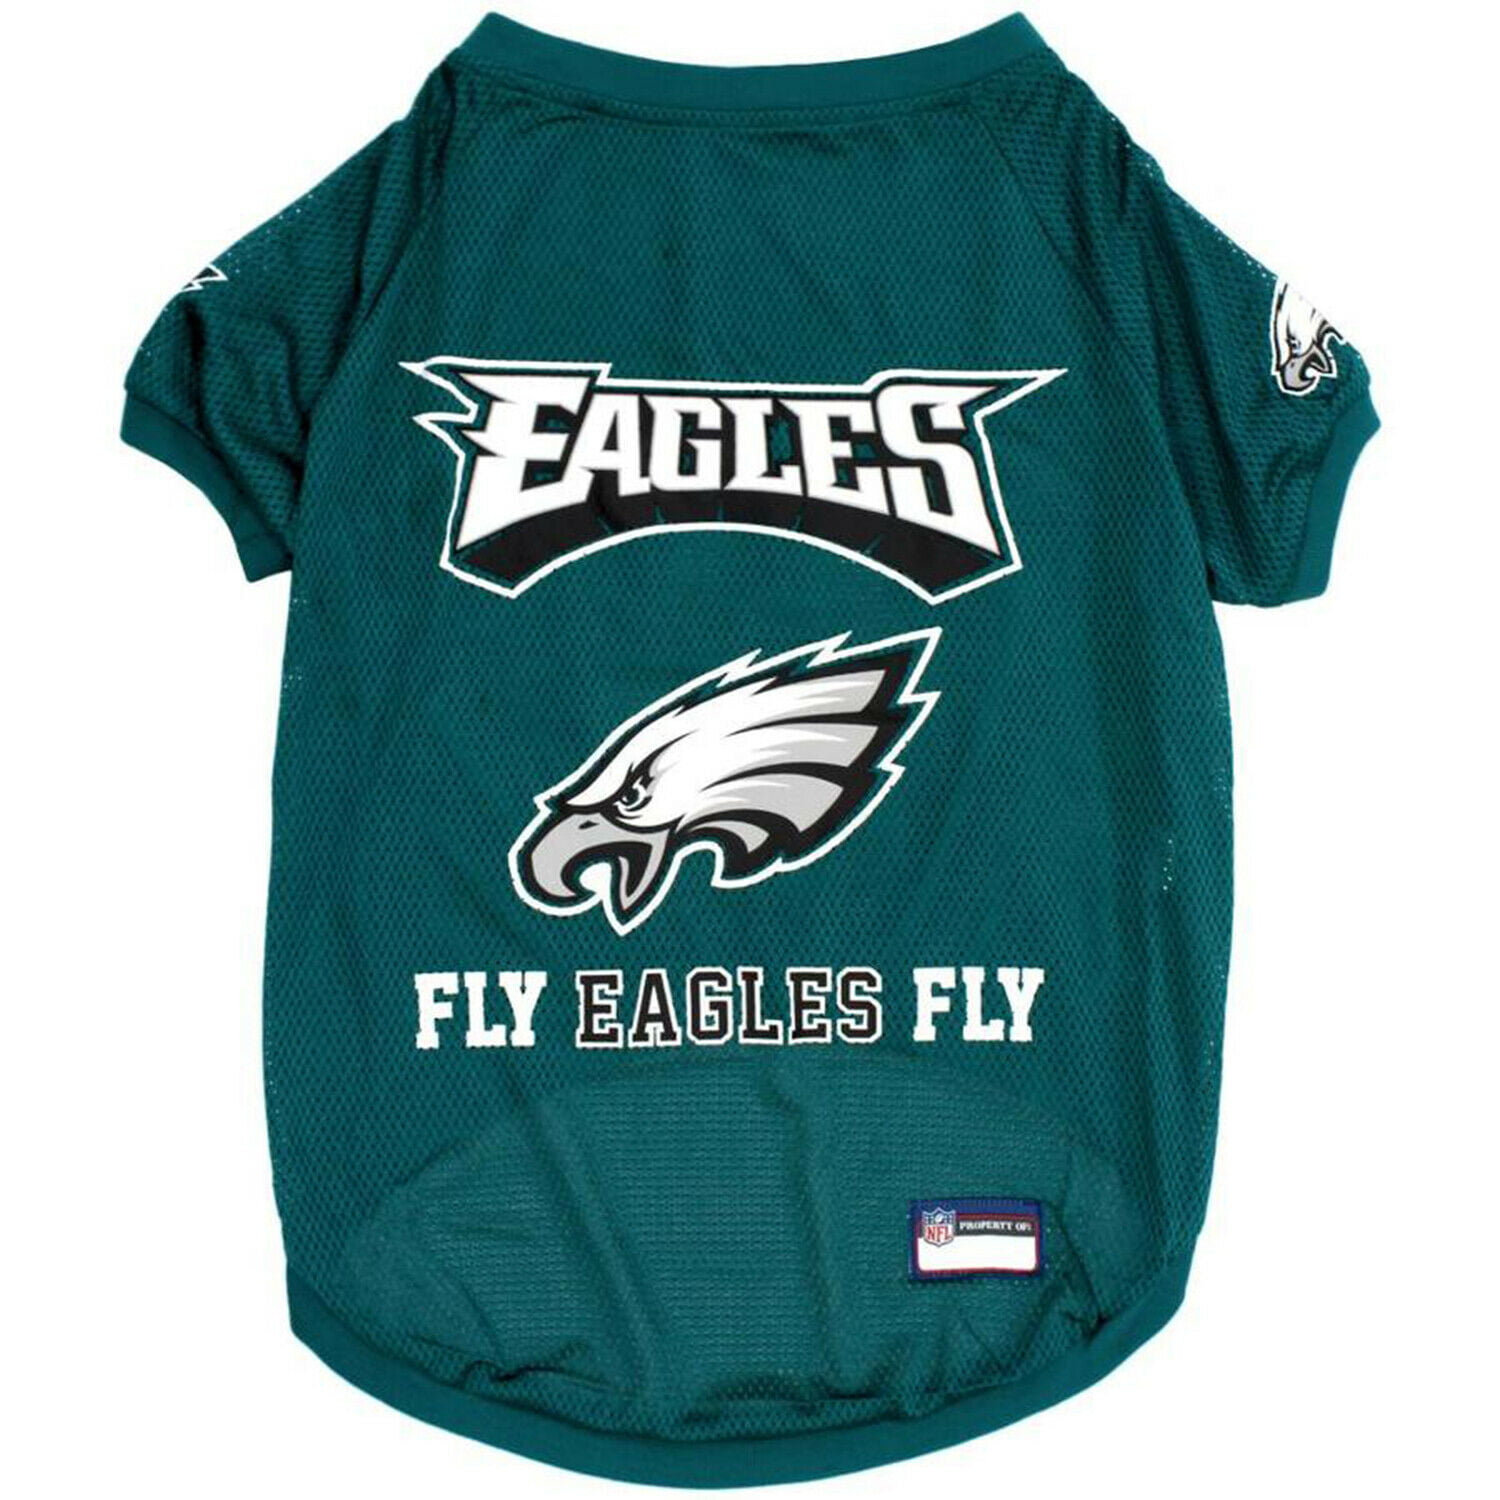 Pets First NFL Philadelphia Eagles DOGS & CATS Premium Raglan Mesh Jersey.  Licensed, Durable, Breathable Jersey - Small 